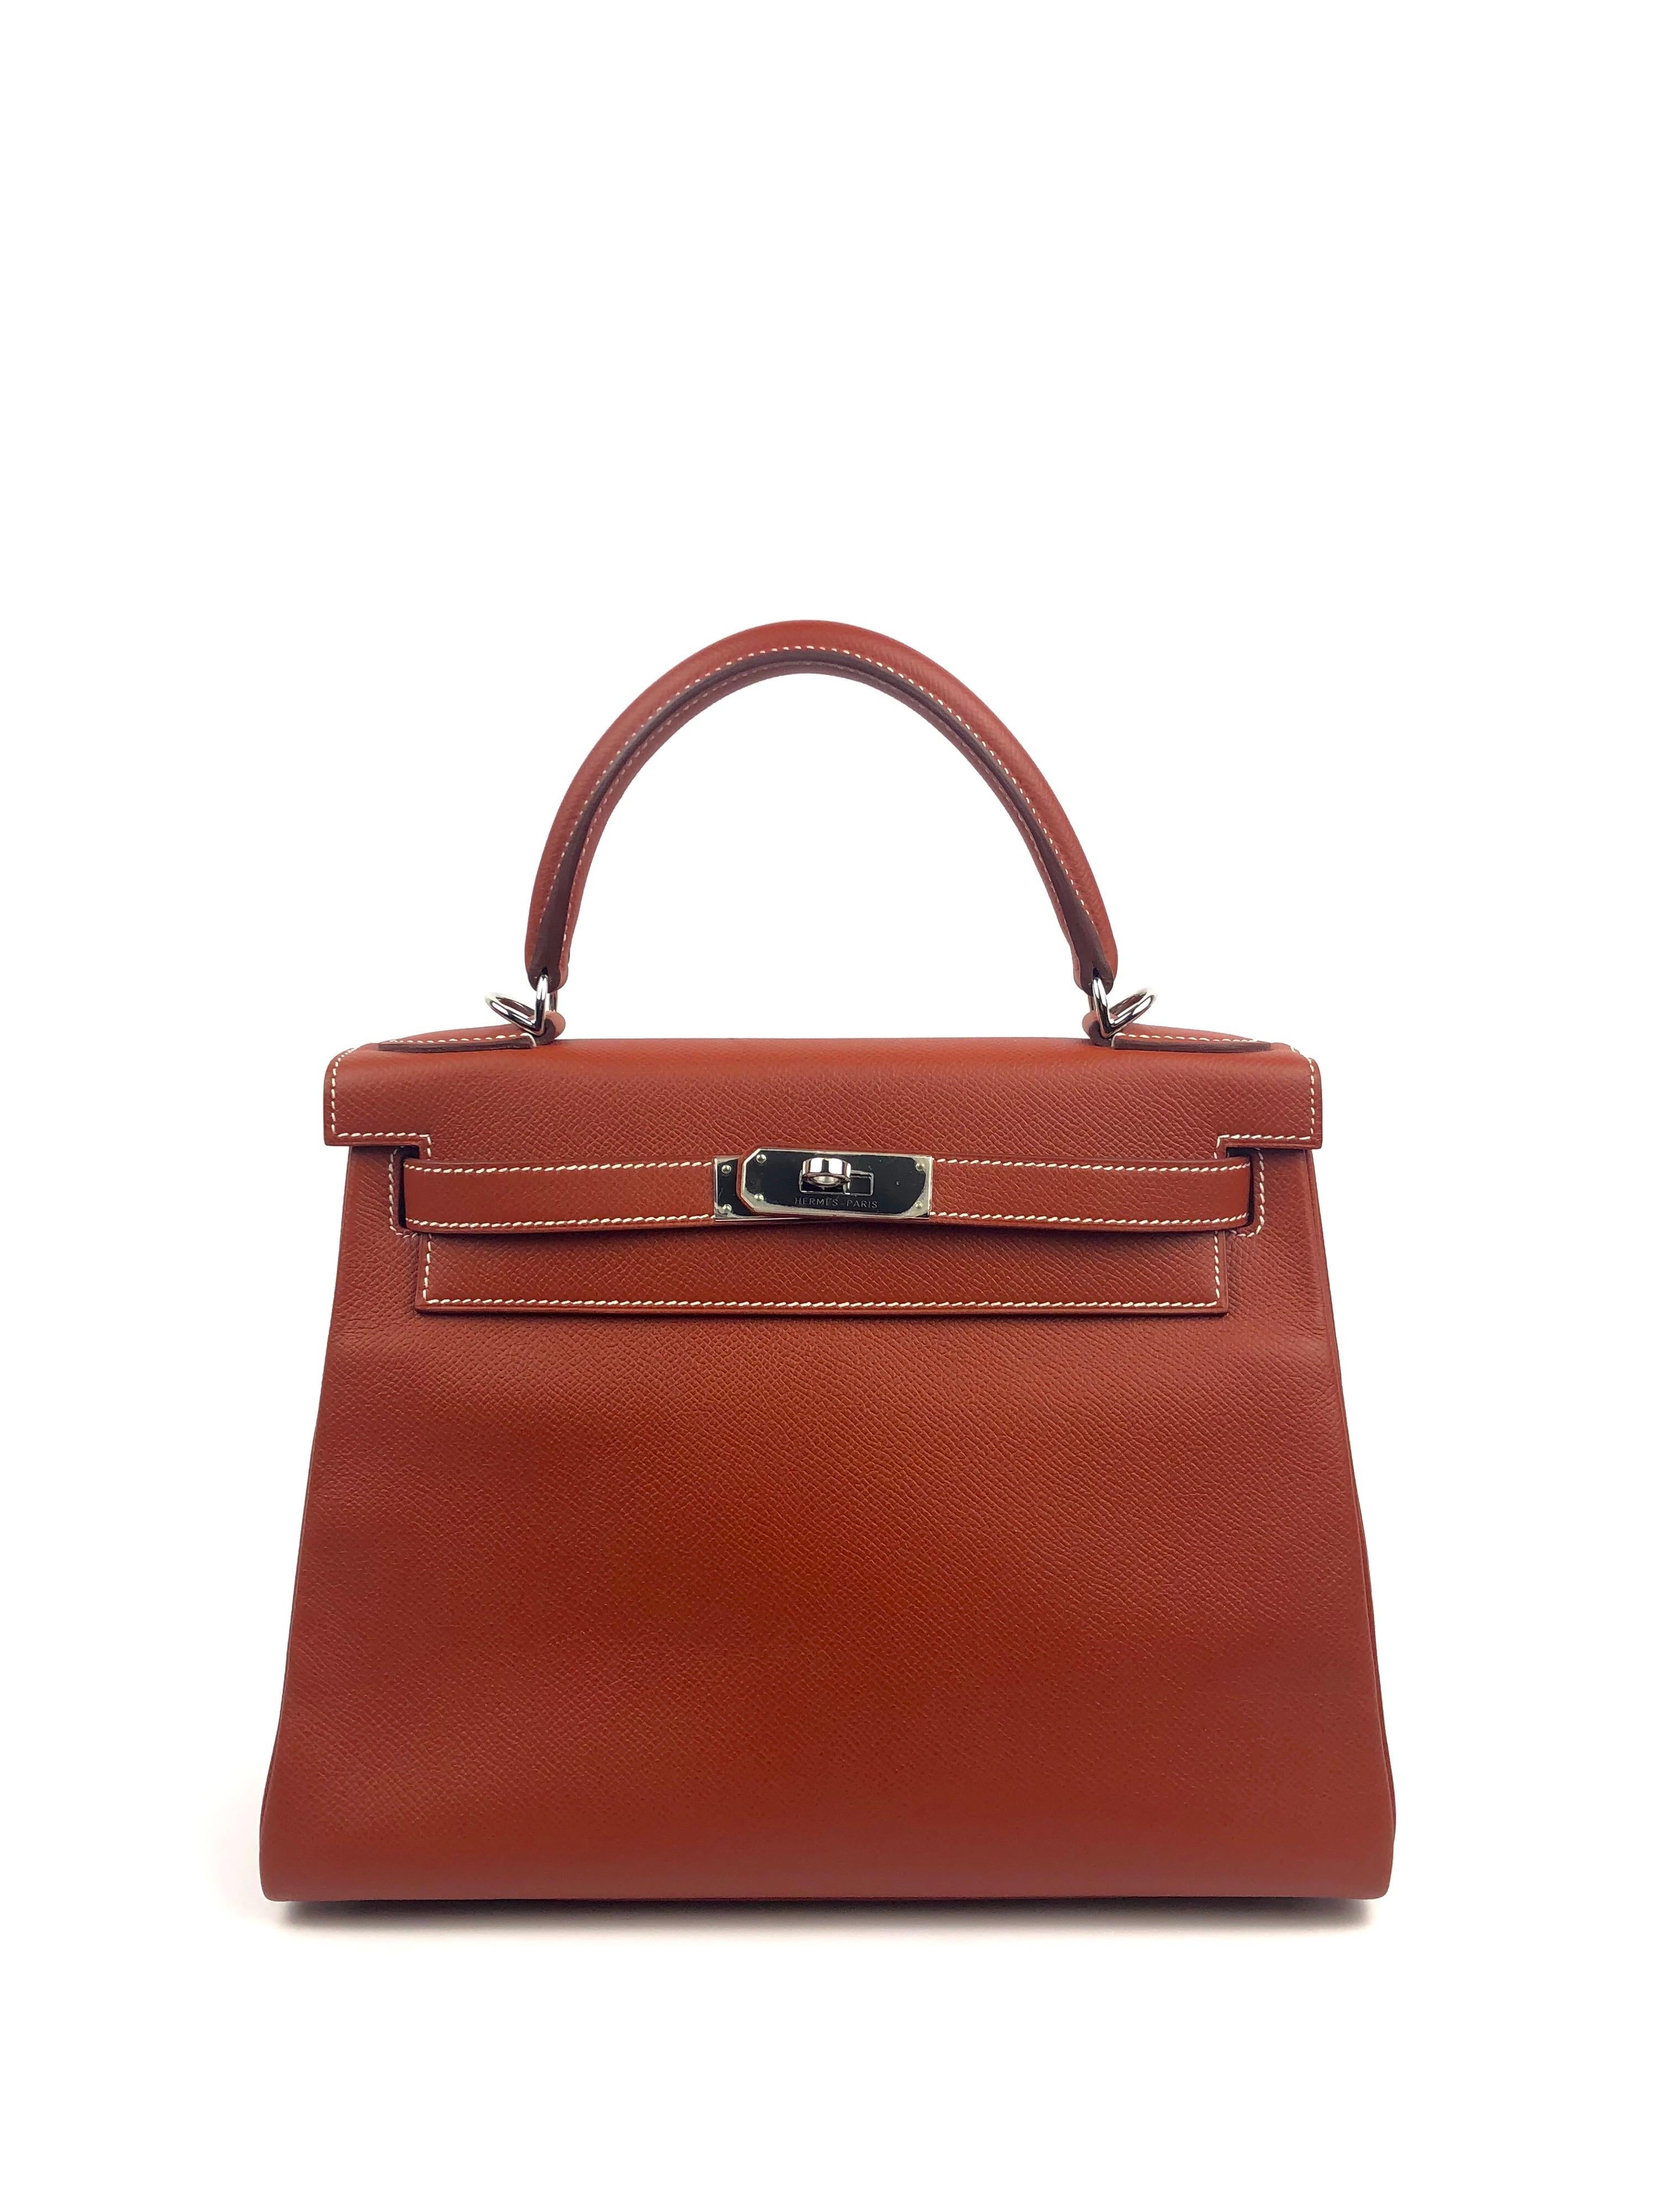 HERMES KELLY 28 TERRE DE SIENNE EPSOM PALLADIUM HARDWARE.

Pristine Excellent Condition, with Plastic on Hardware and feet. Perfect corners and excellent structure. T Stamp 2015.

*Missing Leather Clochette (key holder) does include lock and